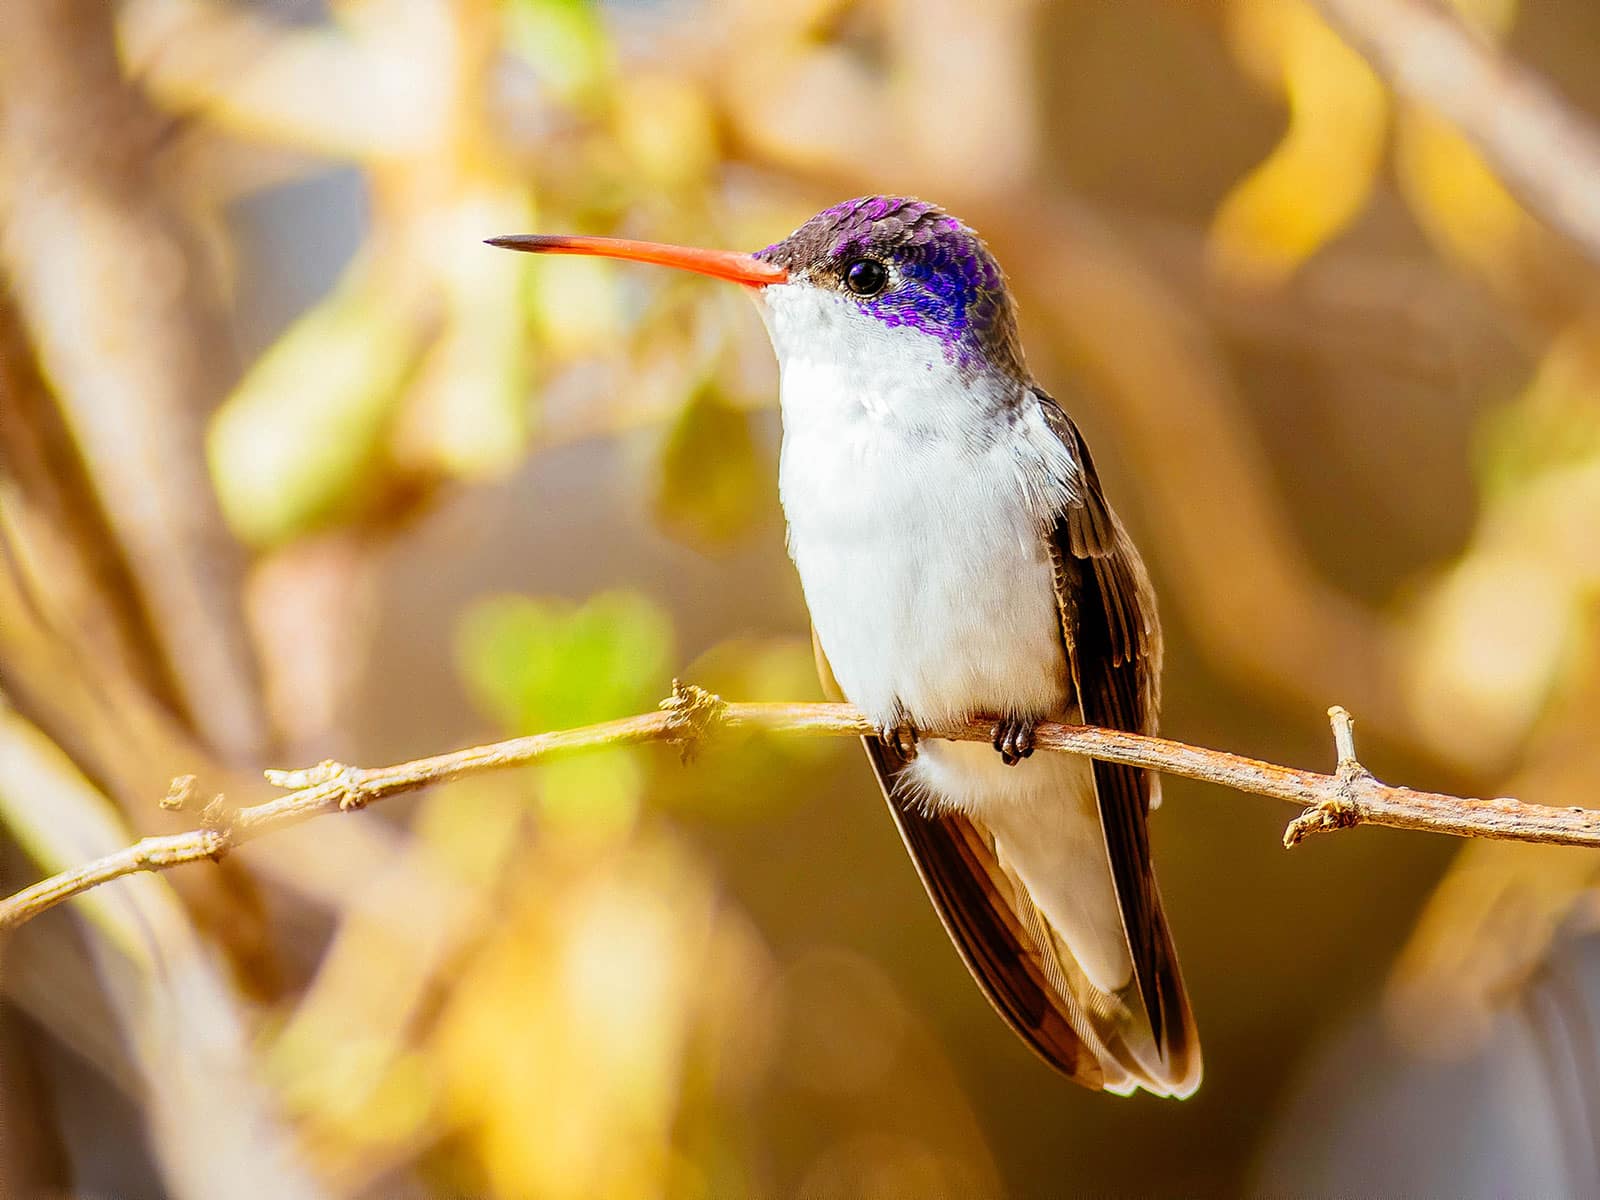 Violet-crowned hummingbird sitting on a thin branch